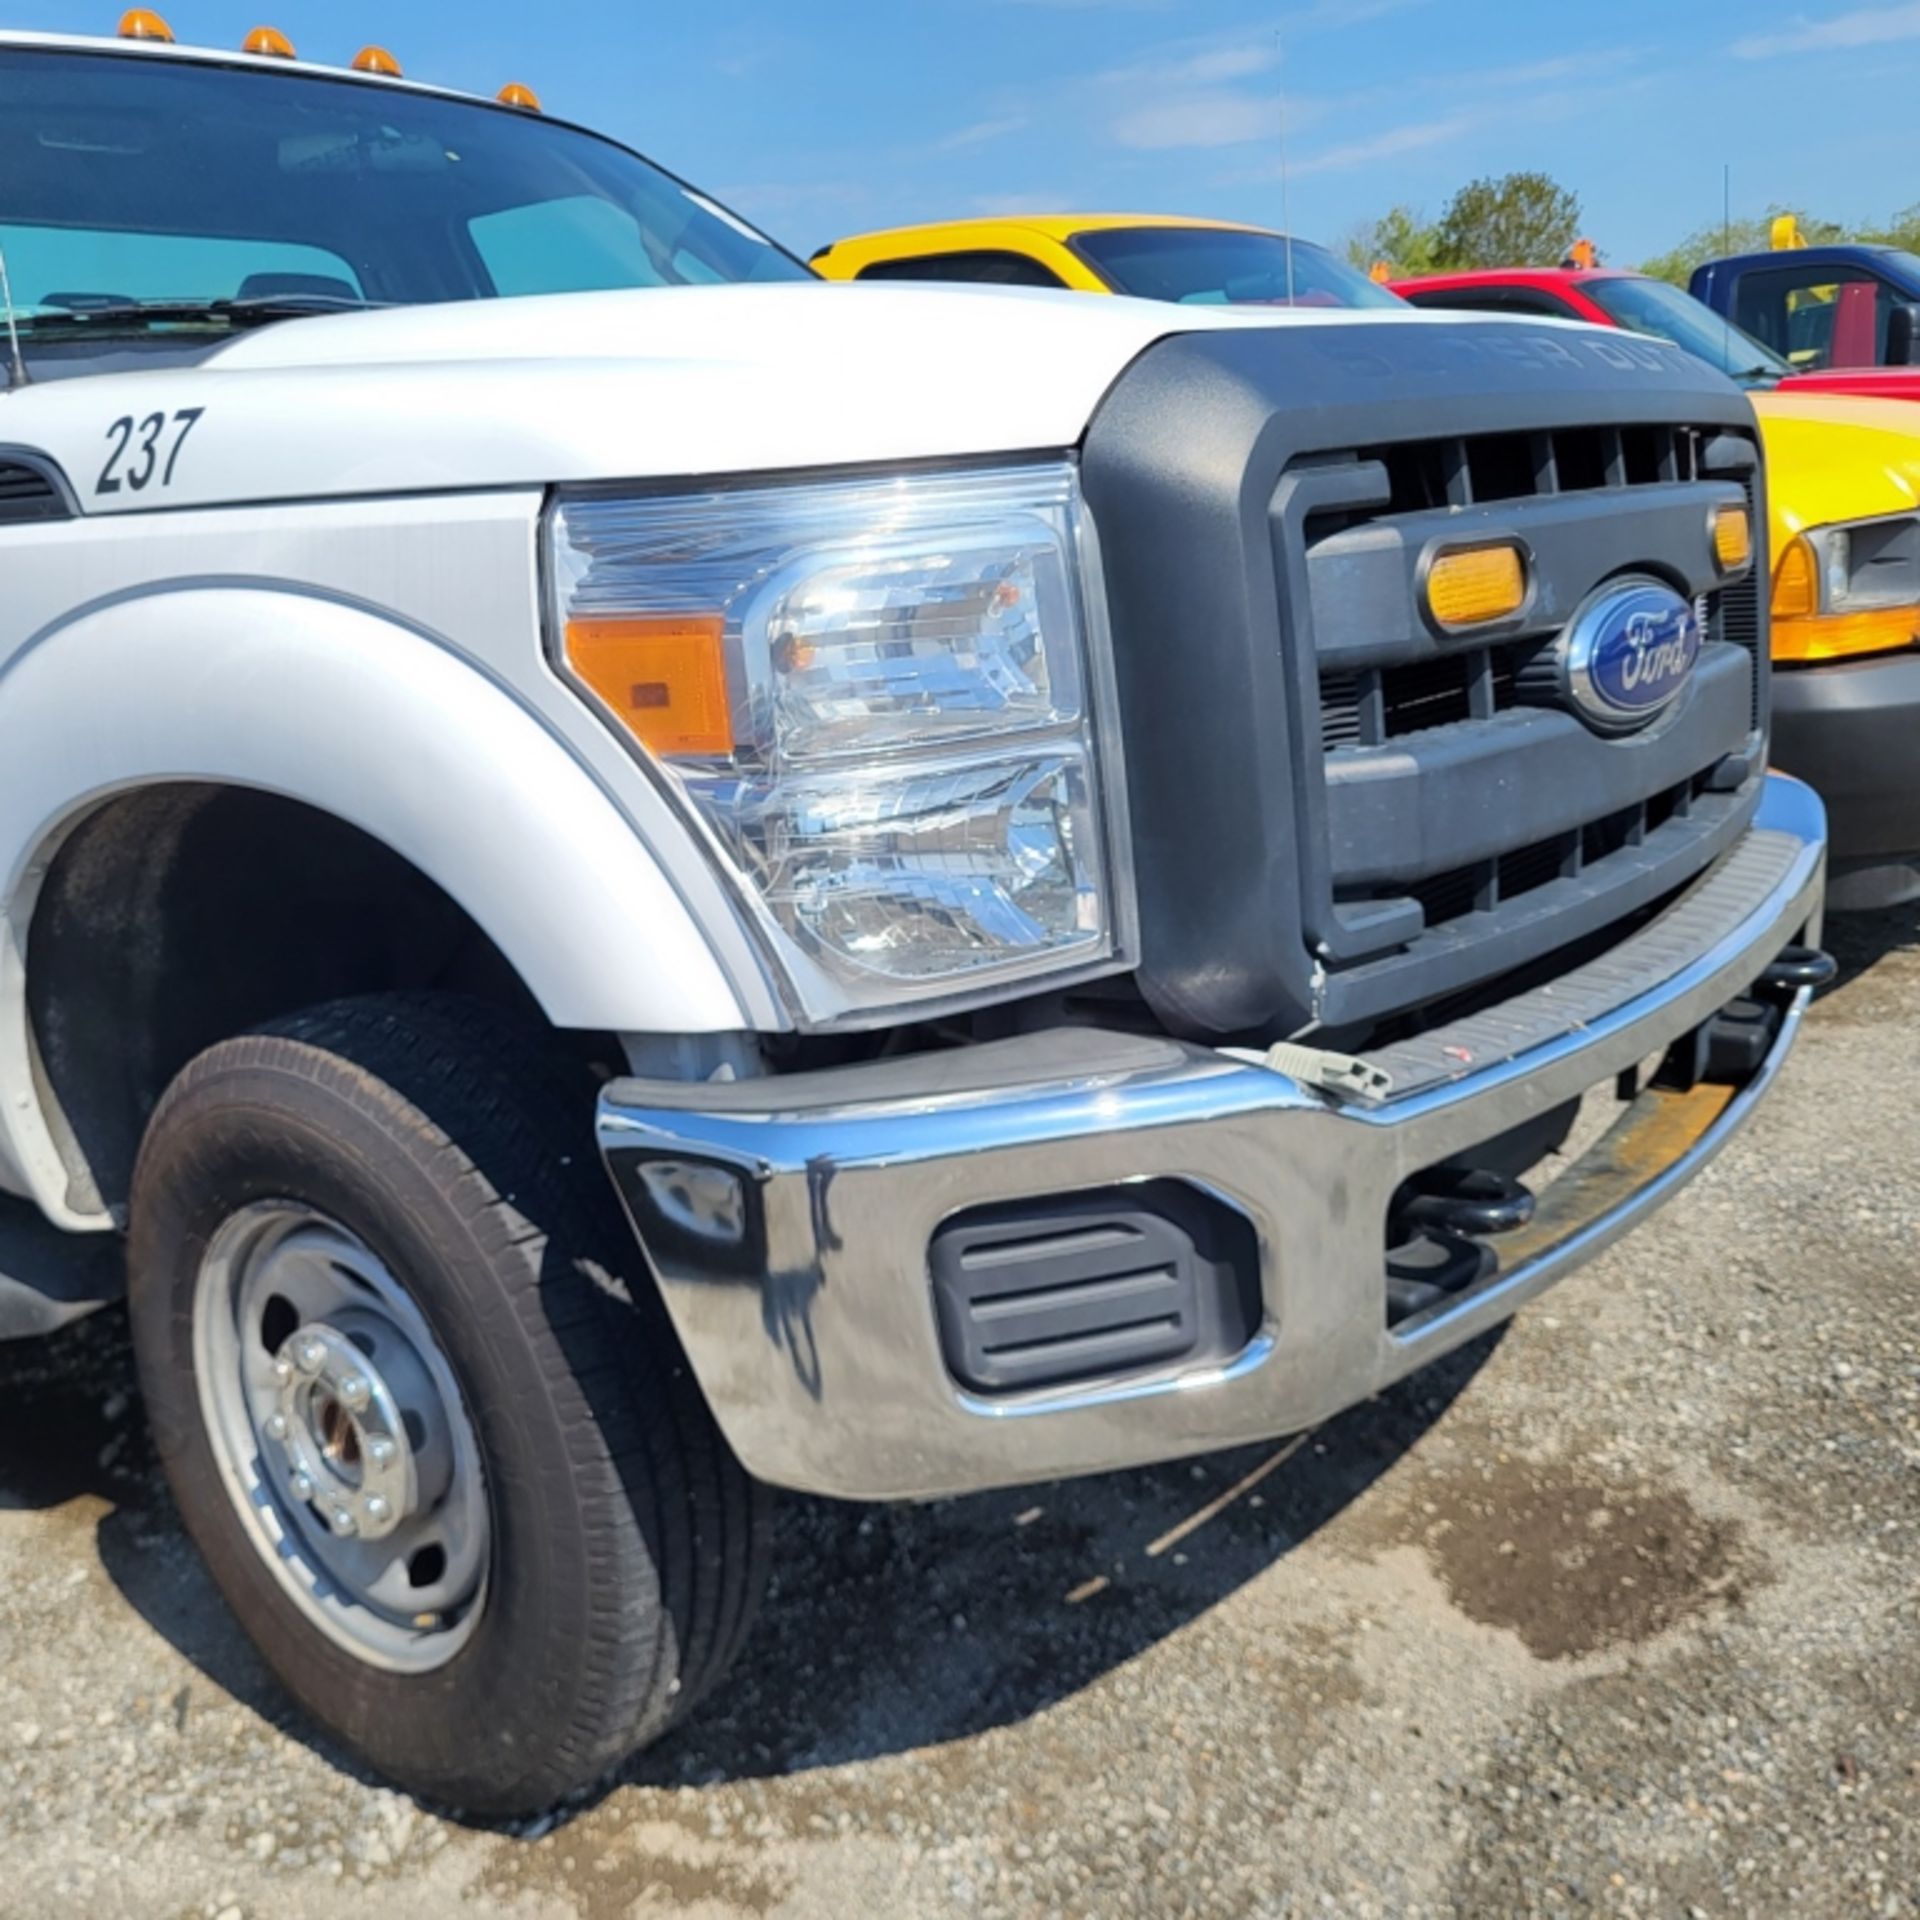 2013 Ford F-350 Pickup - Image 5 of 17